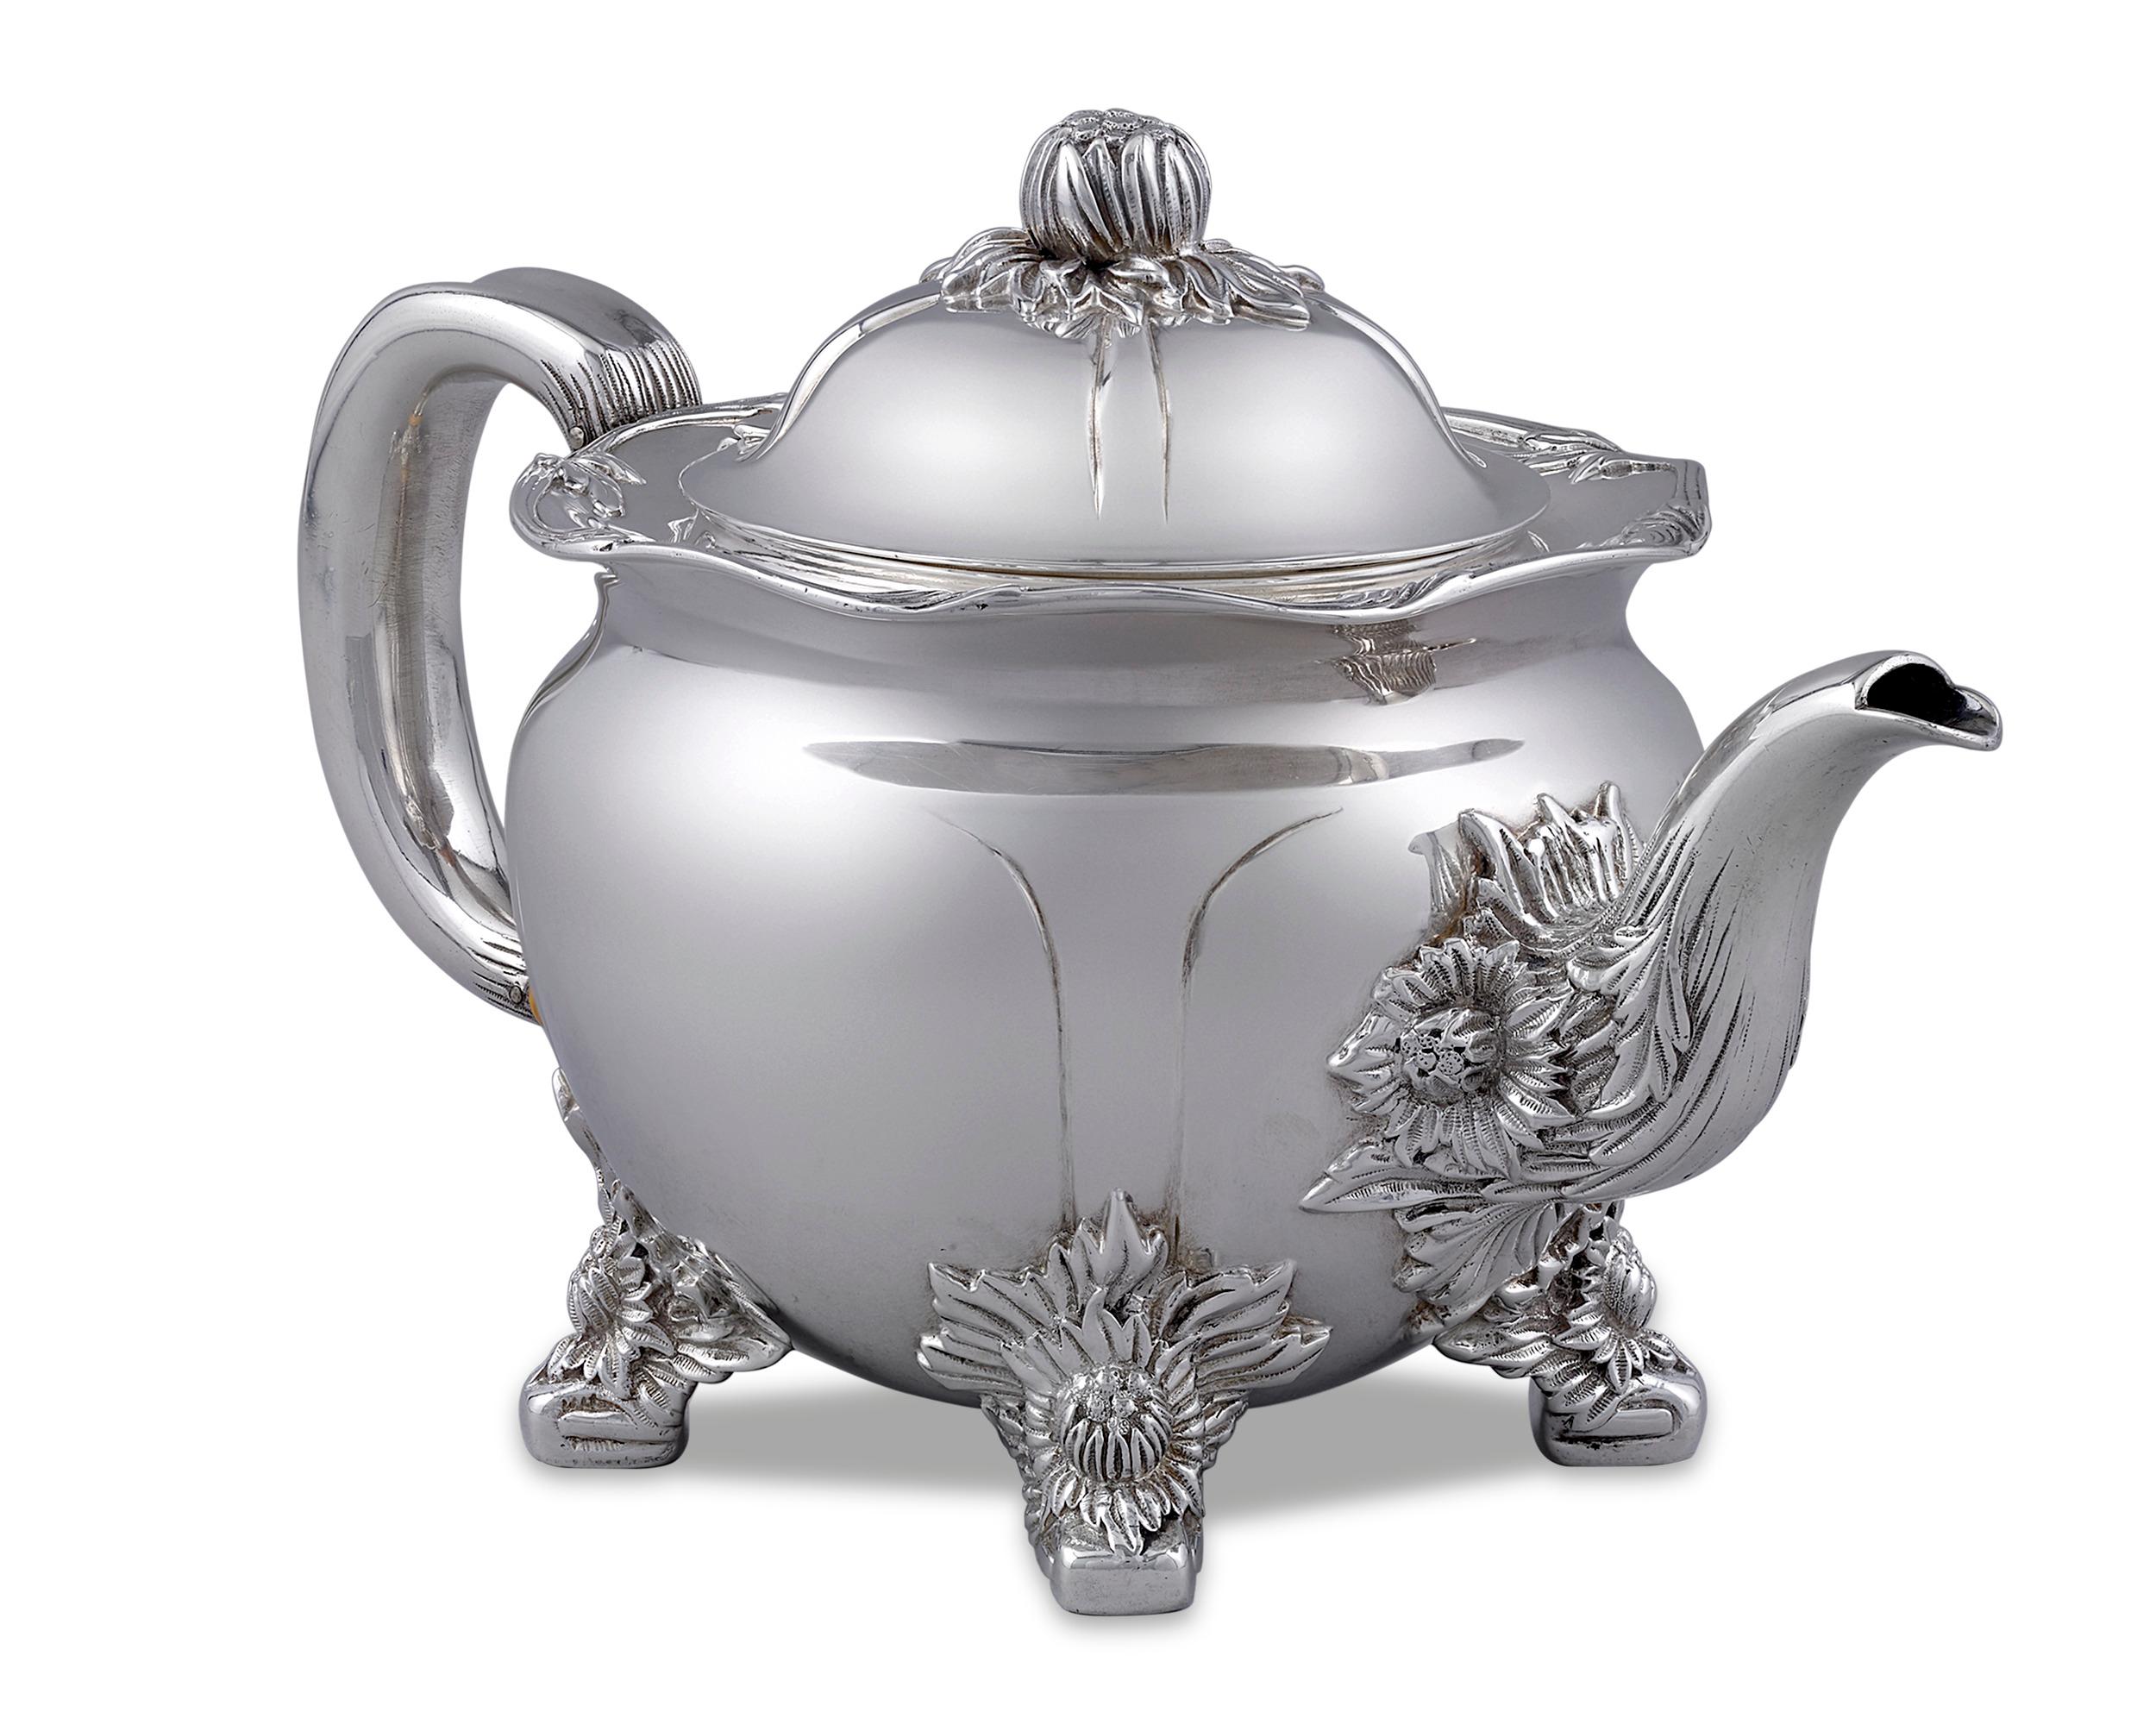 This rare three-piece sterling silver tea service by Tiffany & Co. is beautifully crafted in the popular Chrysanthemum pattern. Comprised of a teapot, sugar bowl and creamer, the set’s elaborate floral motif creates a design of graceful elegance.